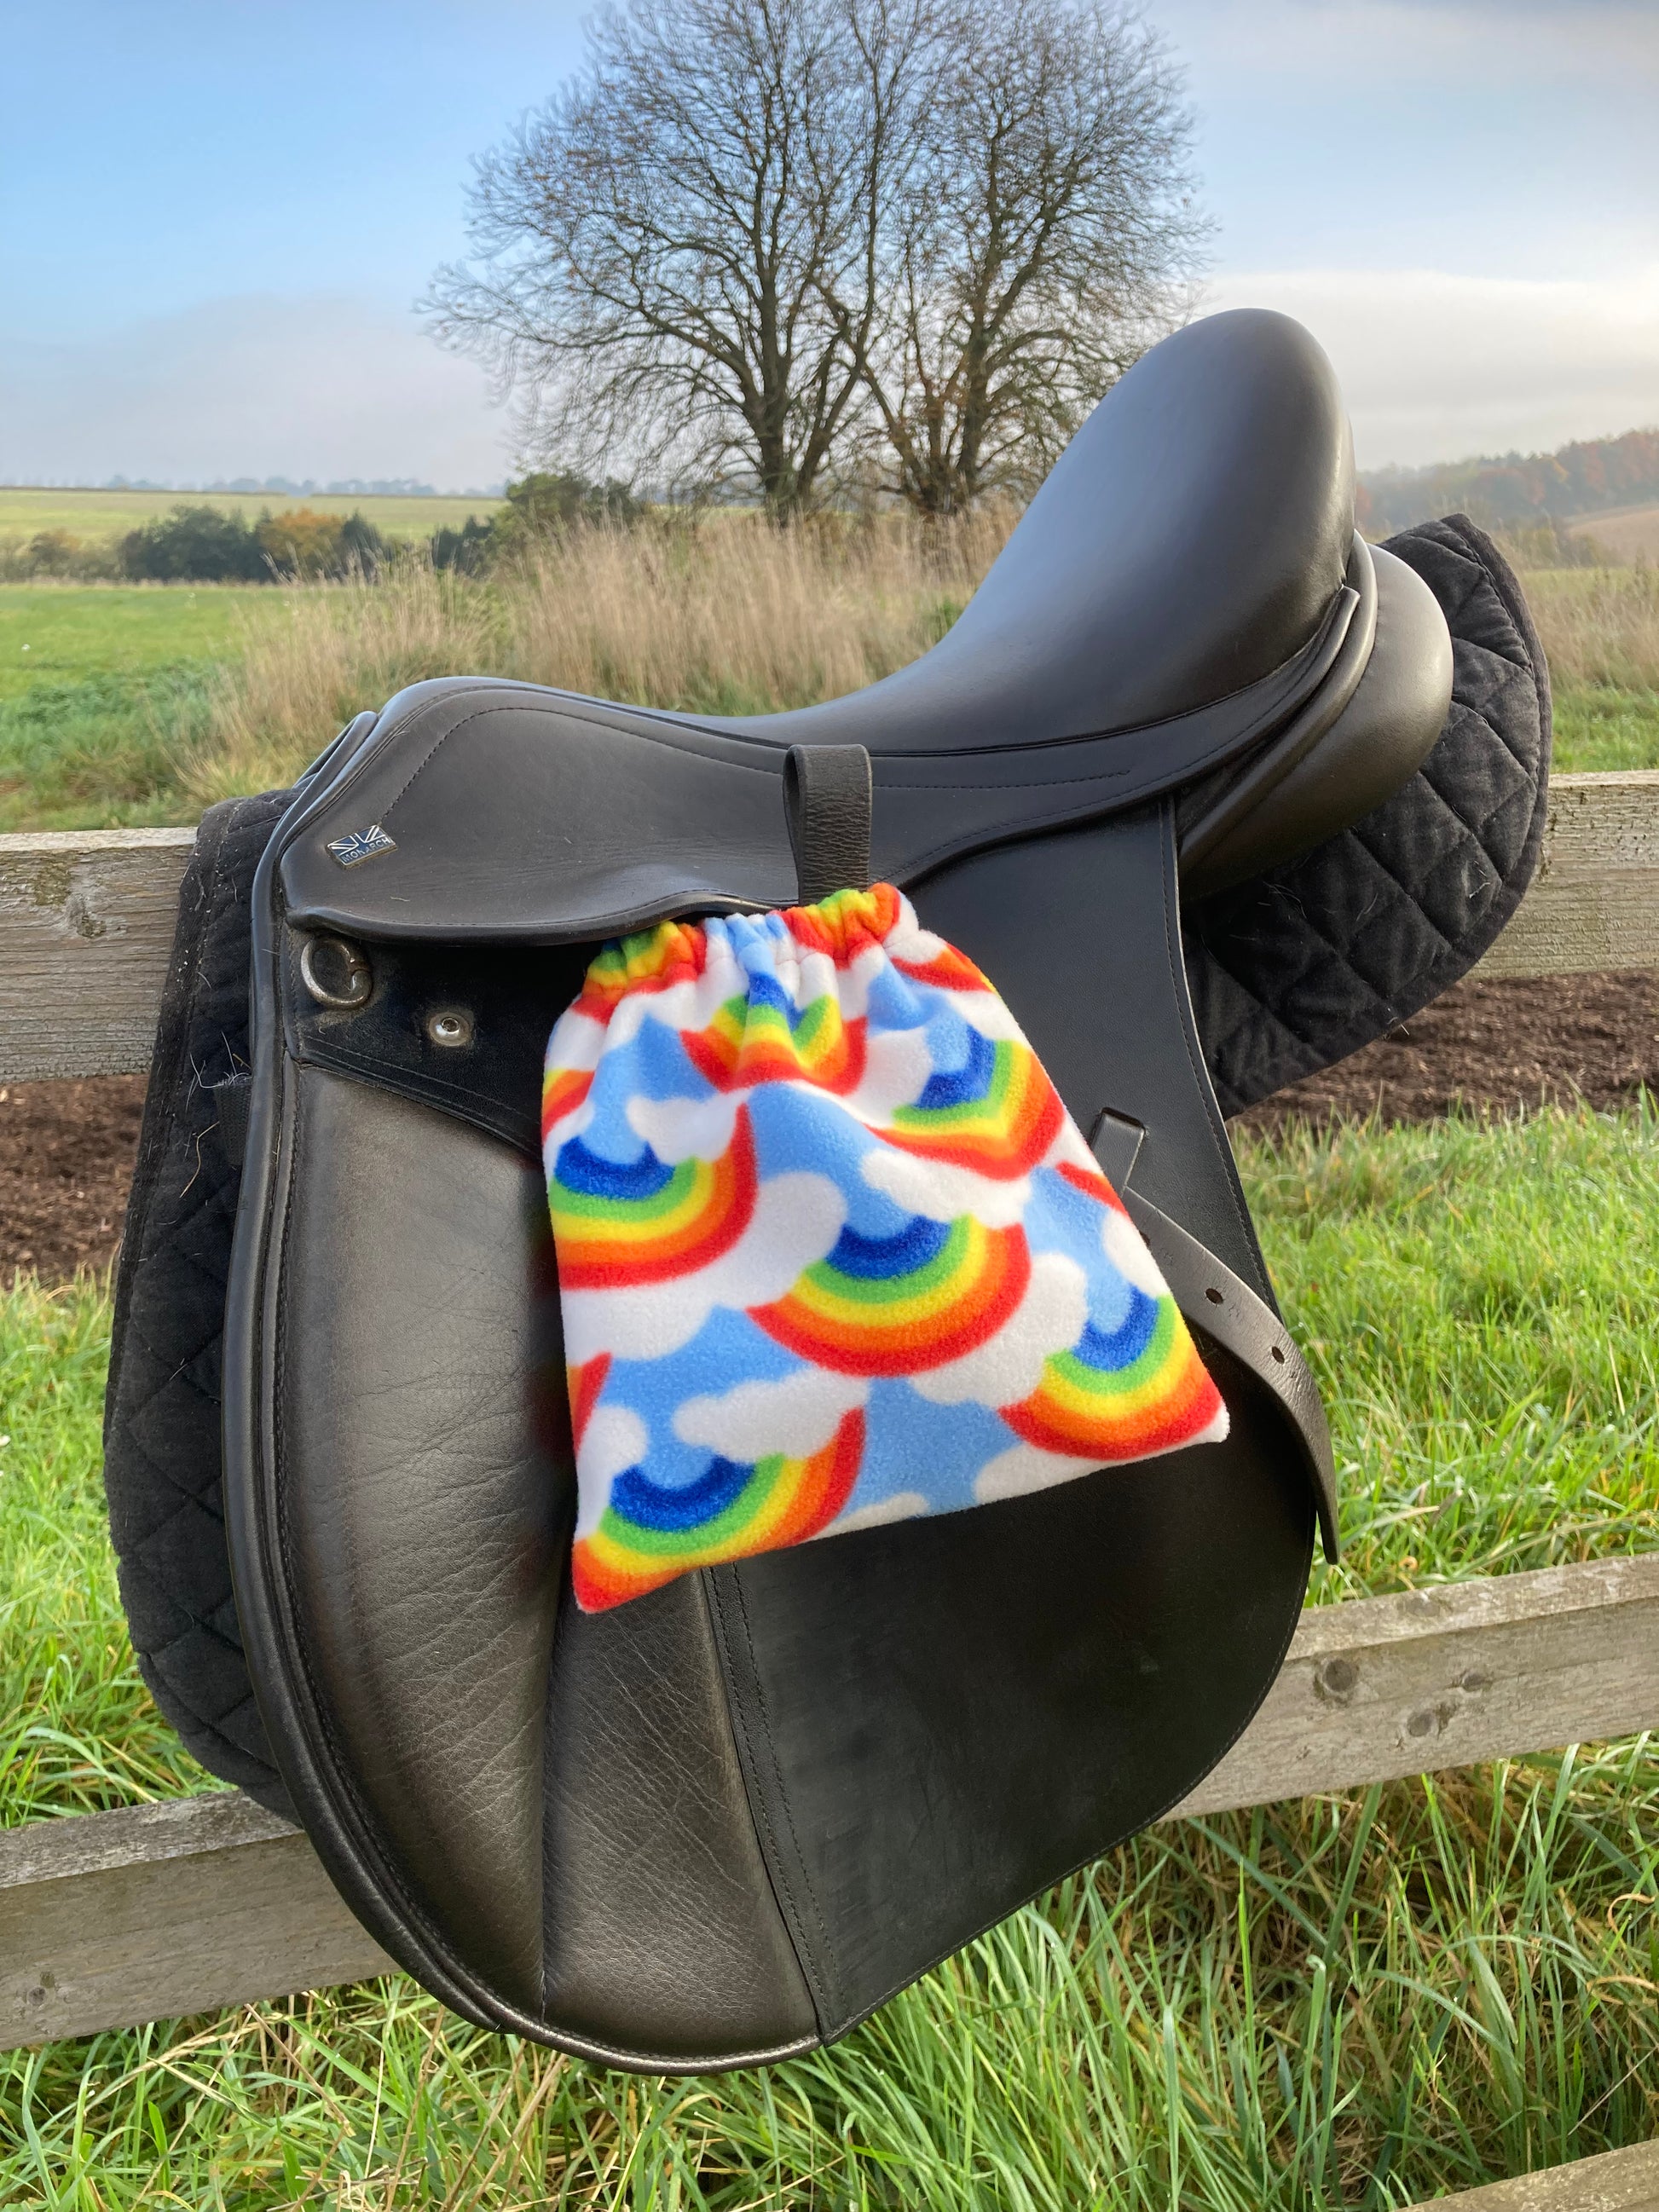 rainbow stirrup covers on the stirrups attached to a saddle